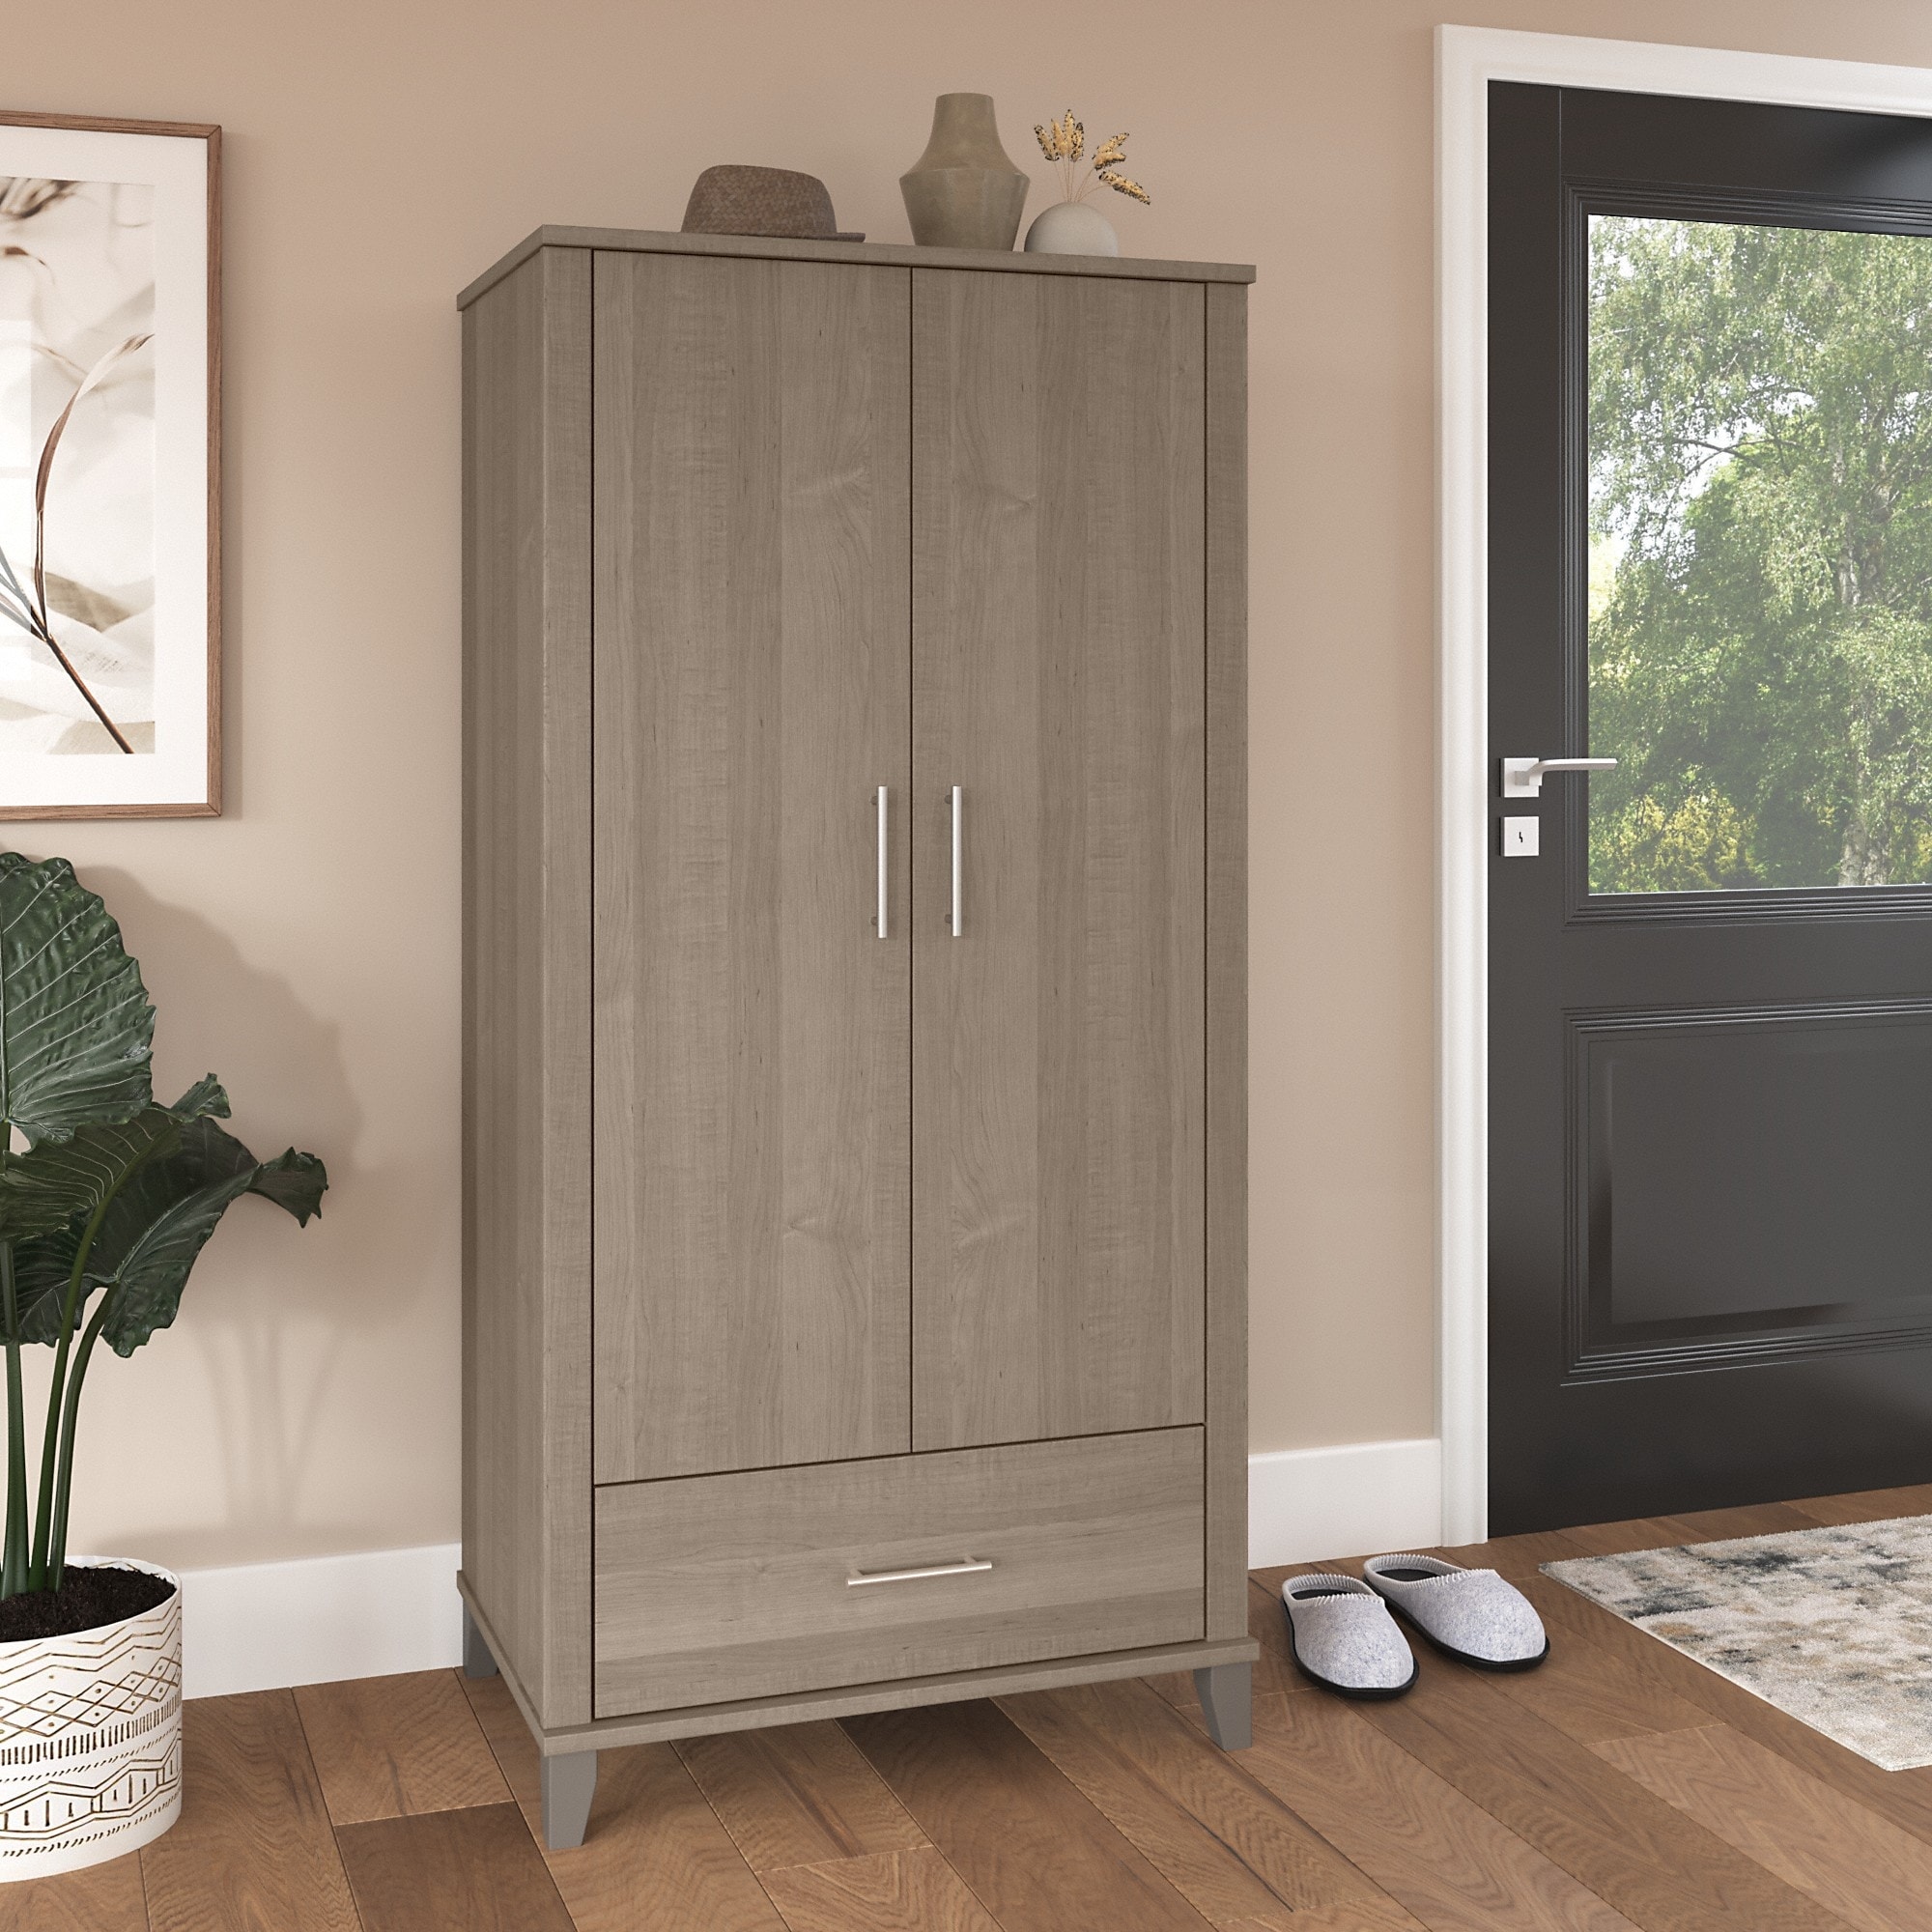 https://ak1.ostkcdn.com/images/products/is/images/direct/77edd346828ca0a1ed4c4d4bbc471f3f4046f90c/Somerset-Tall-Entryway-Cabinet-with-Doors-and-Drawer-by-Bush-Furniture.jpg